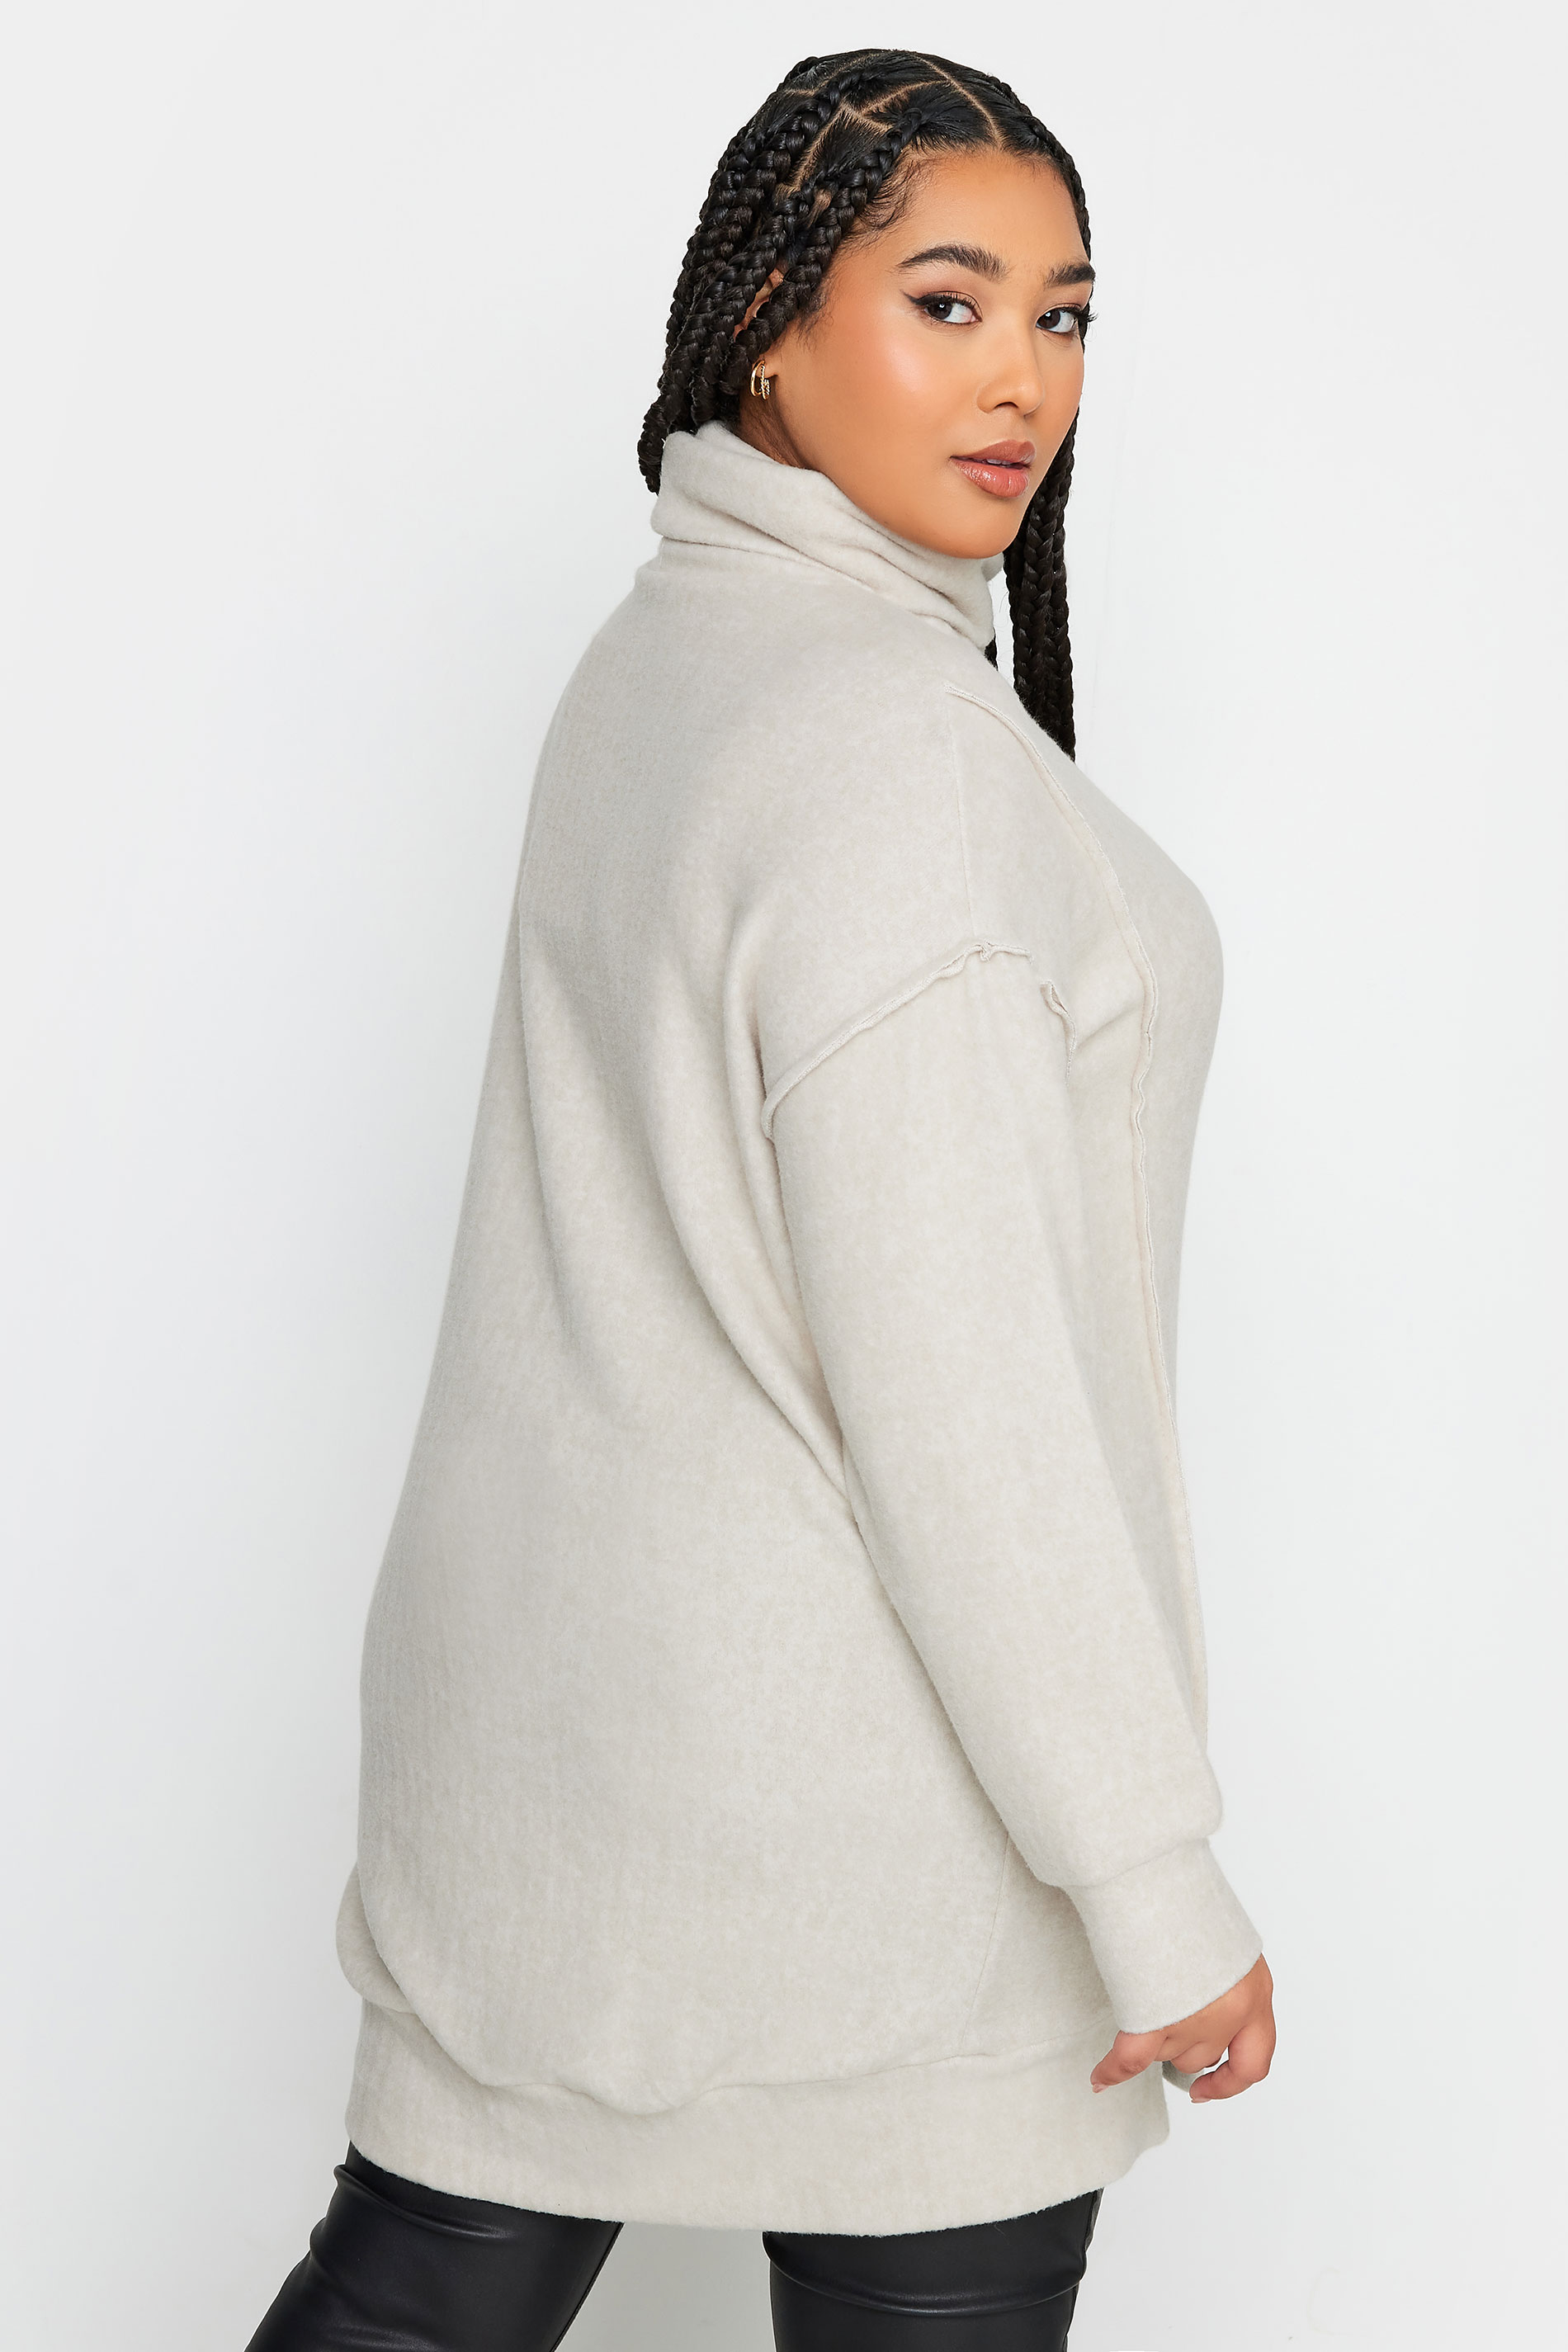 YOURS Plus Size White Soft Touch Turtleneck Sweatshirt | Yours Clothing 3